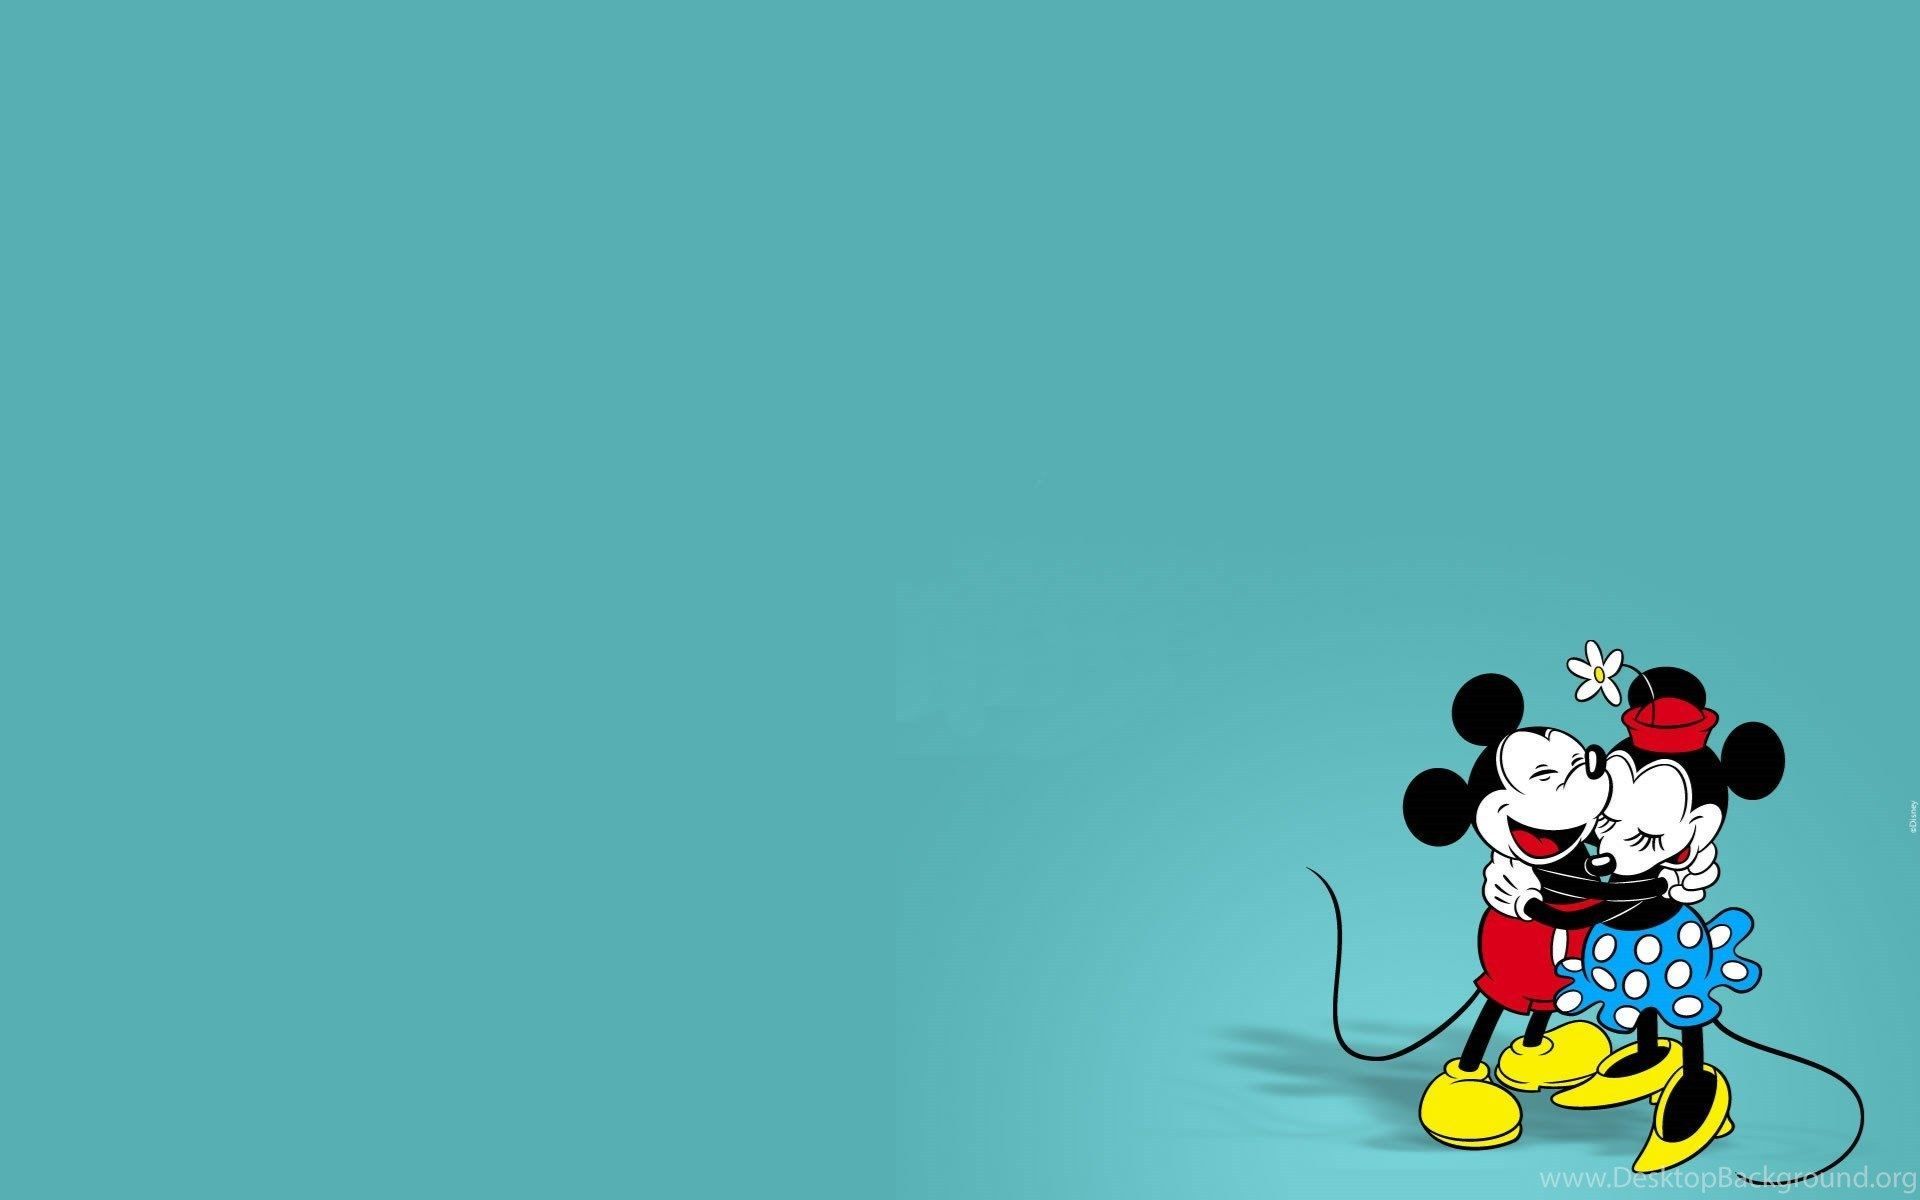 Mickey Mouse Computer Wallpapers 4k Hd Mickey Mouse Computer Backgrounds On Wallpaperbat